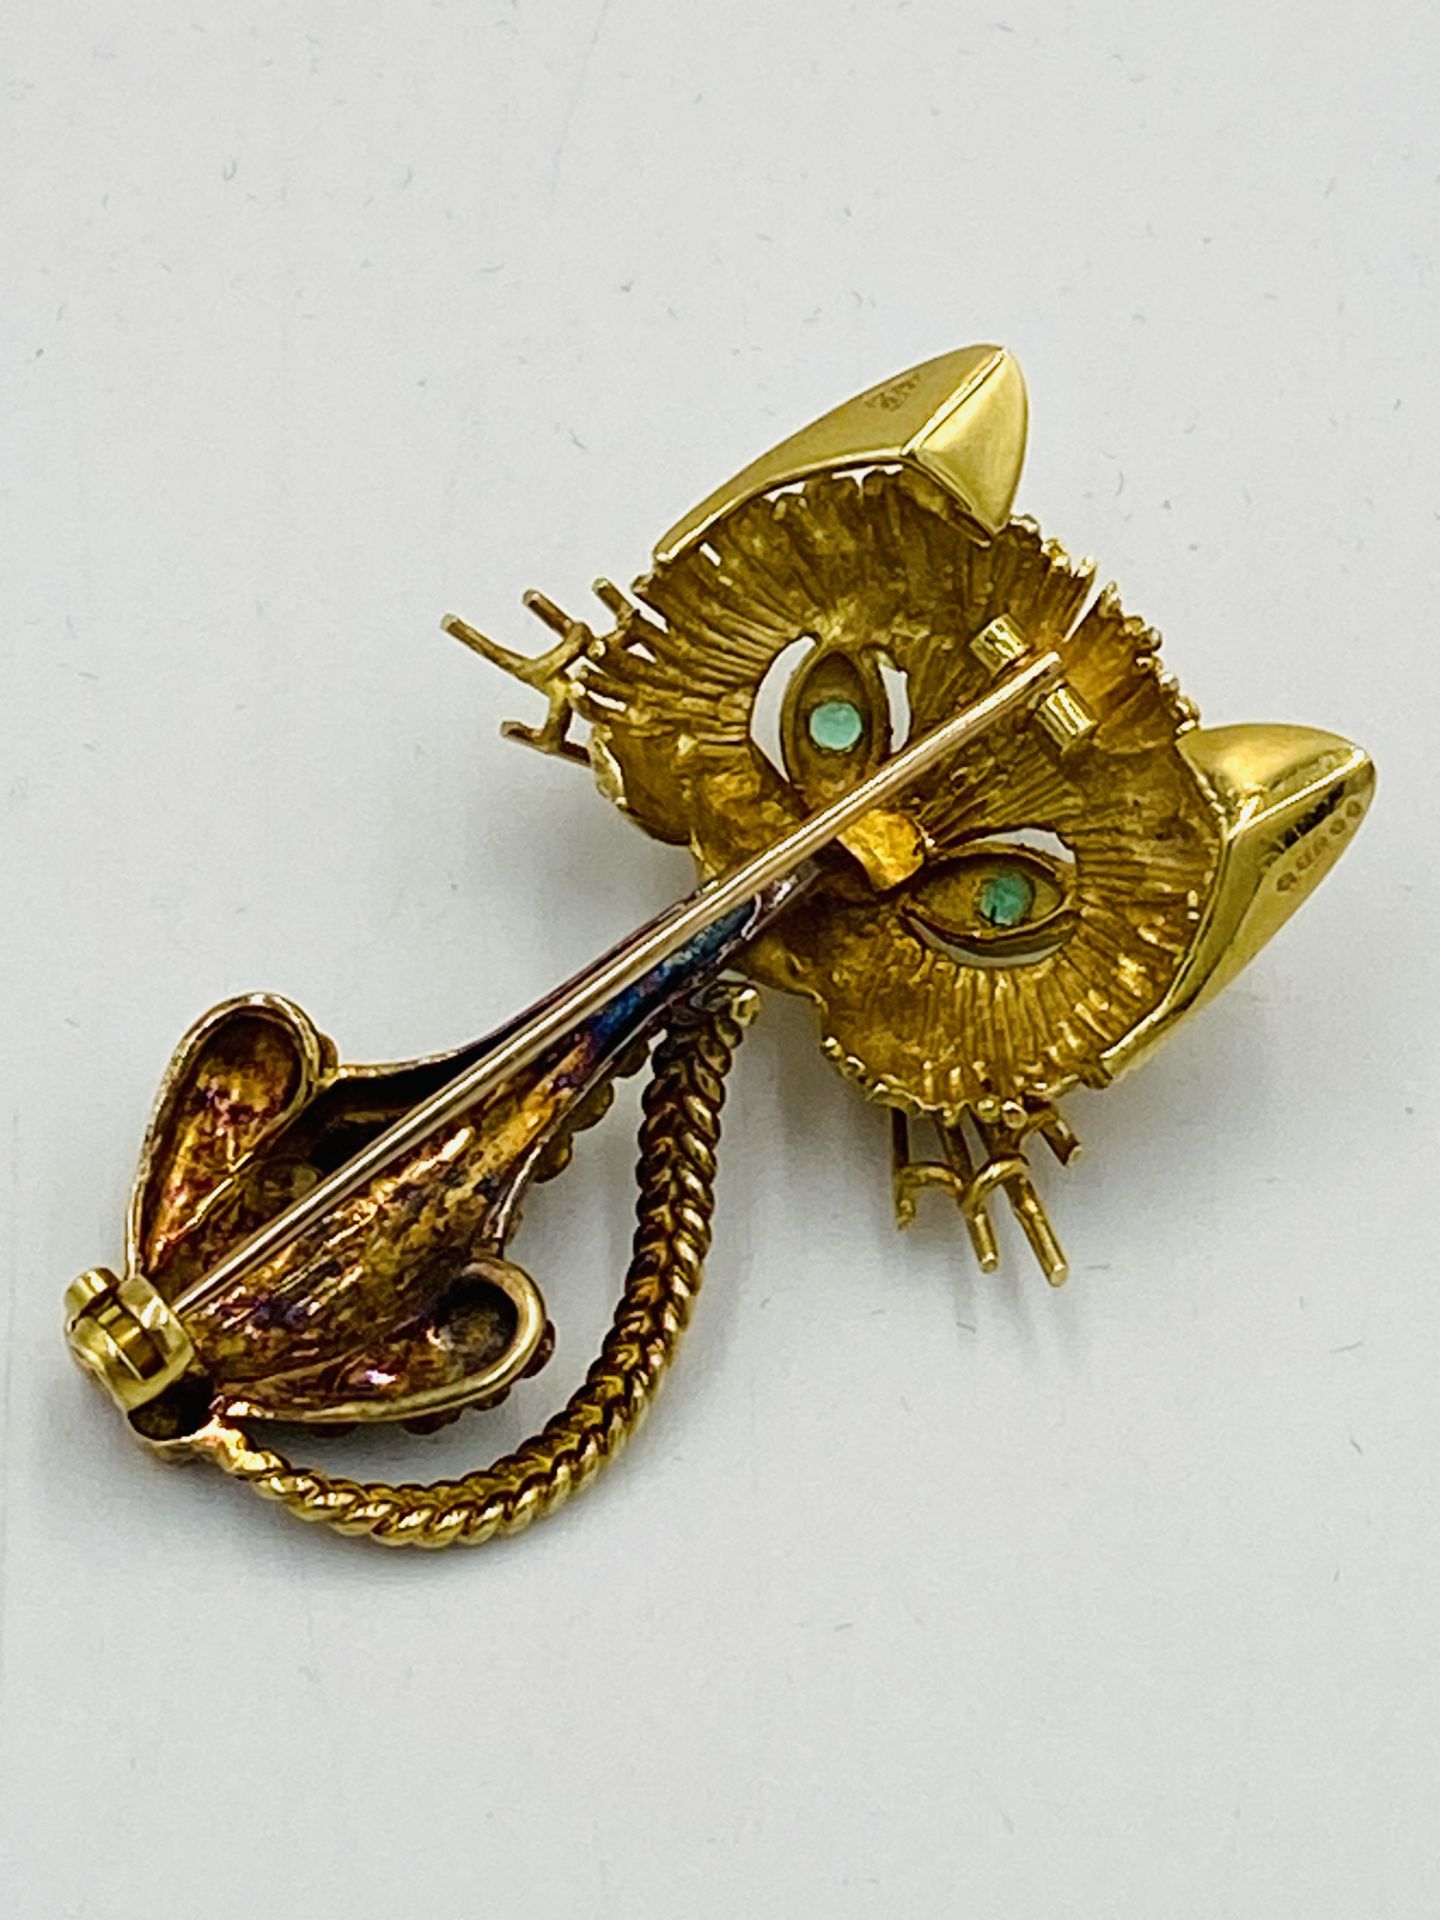 18ct gold Garrards cat brooch set with emerald eyes - Image 6 of 6